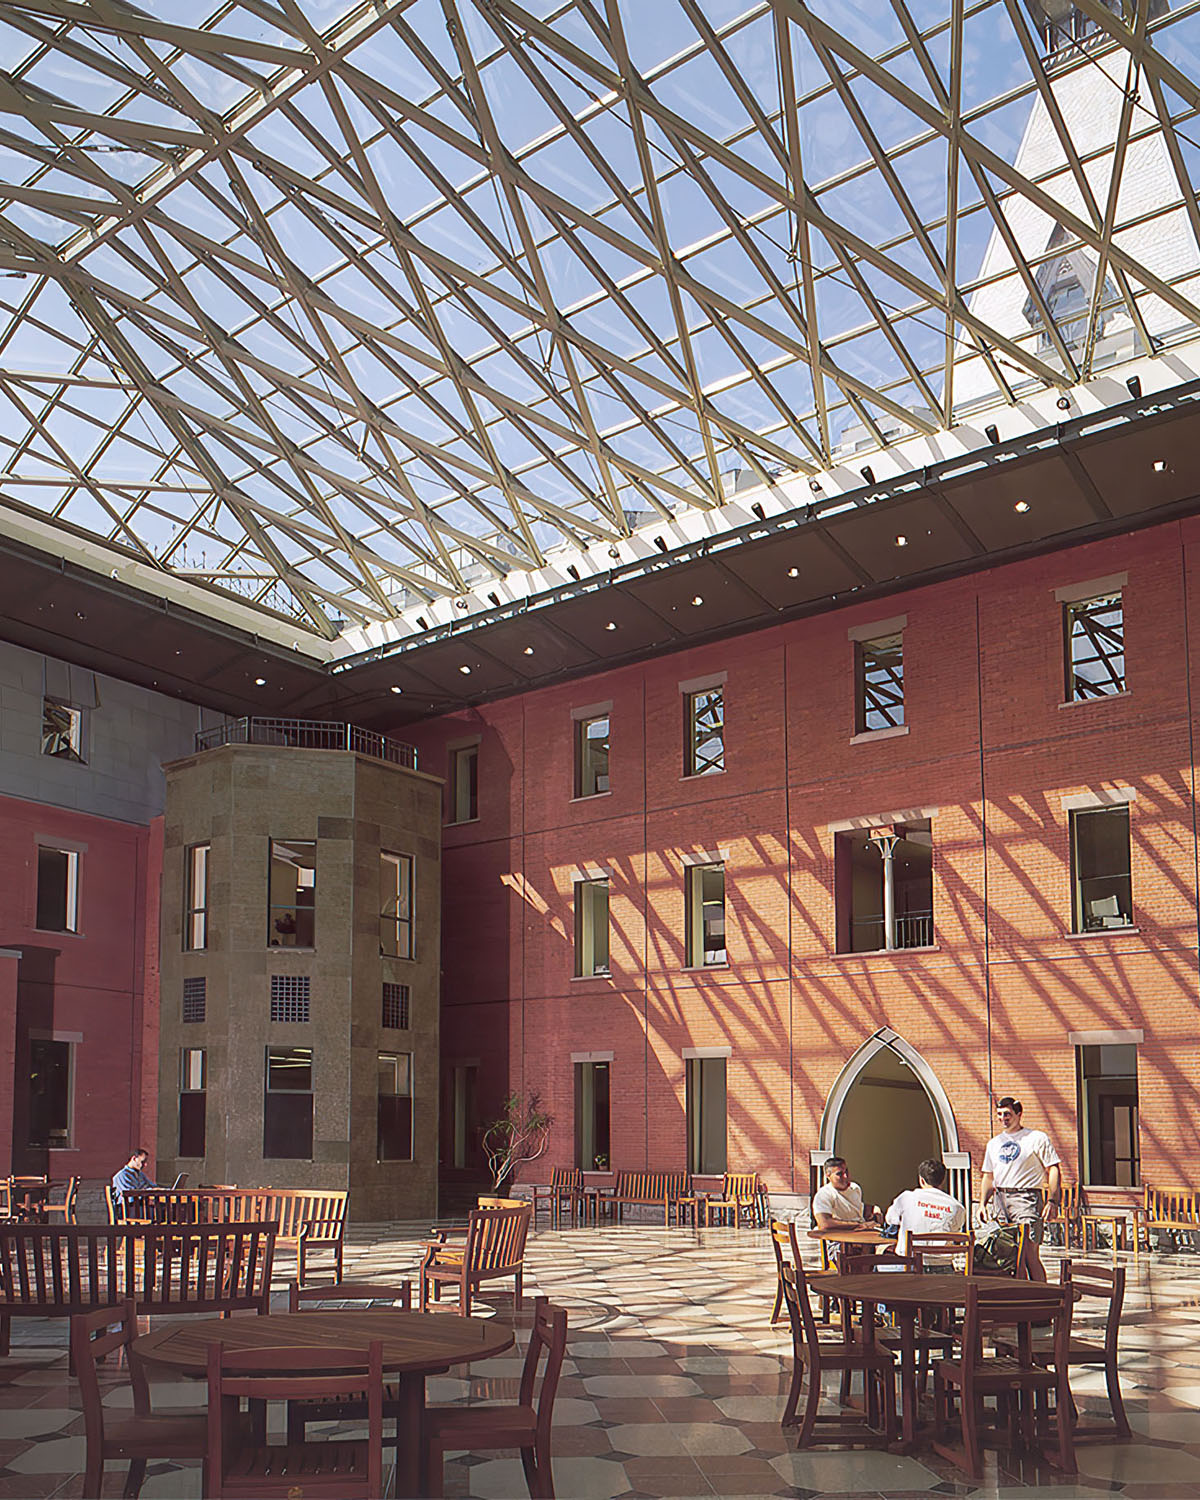 A glass roof covers an atrium with tables and benches for gathering and studying.